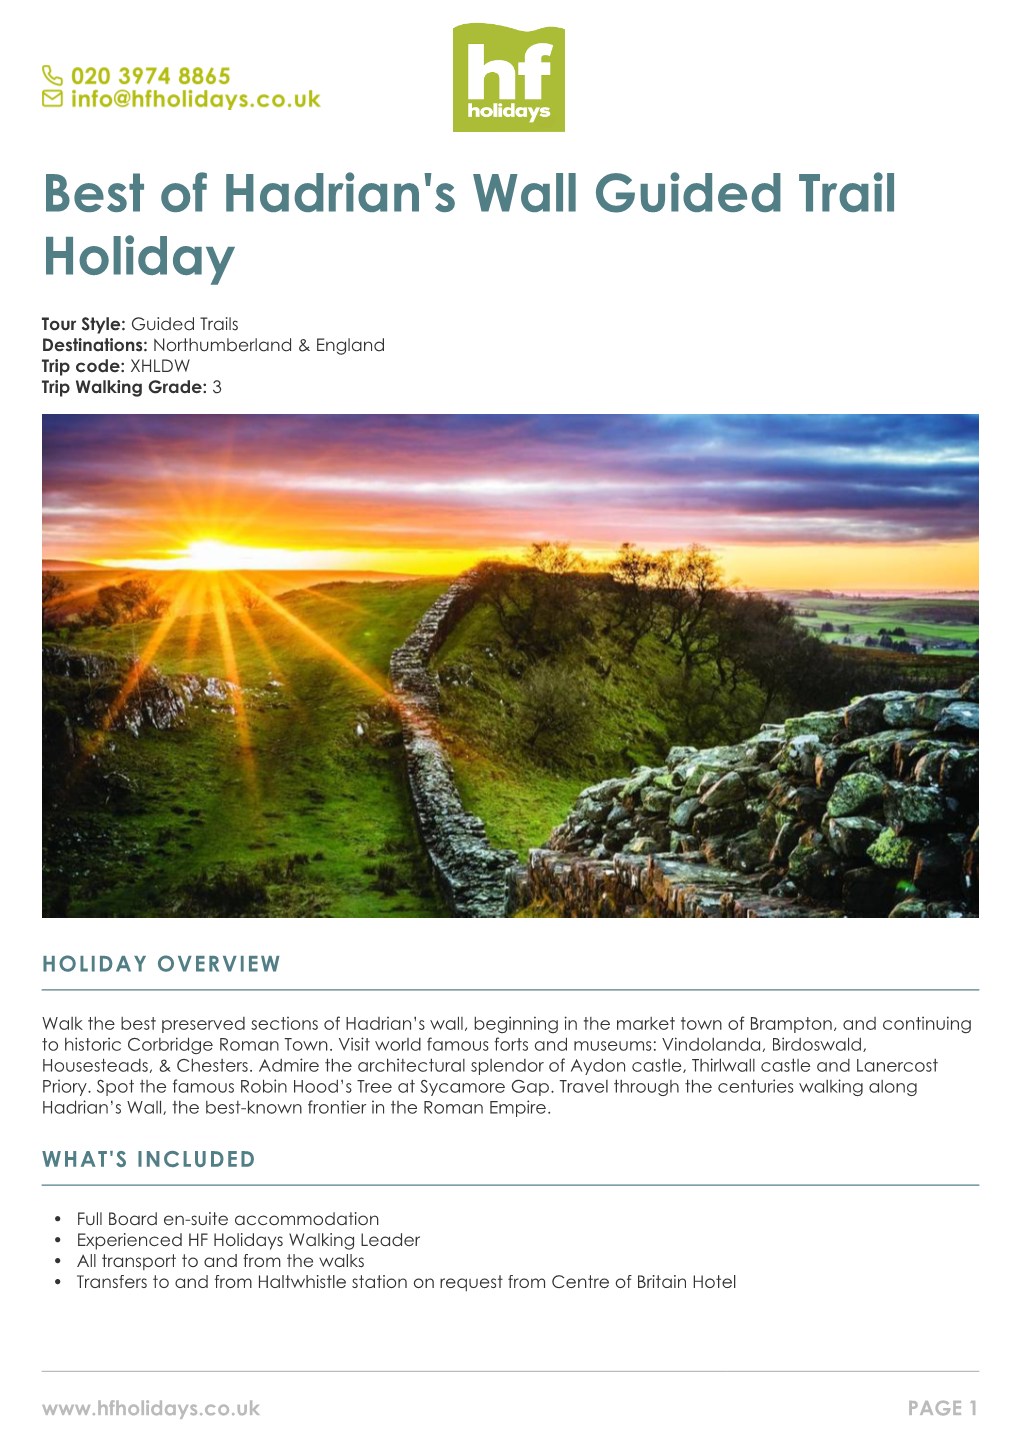 Best of Hadrian's Wall Guided Trail Holiday